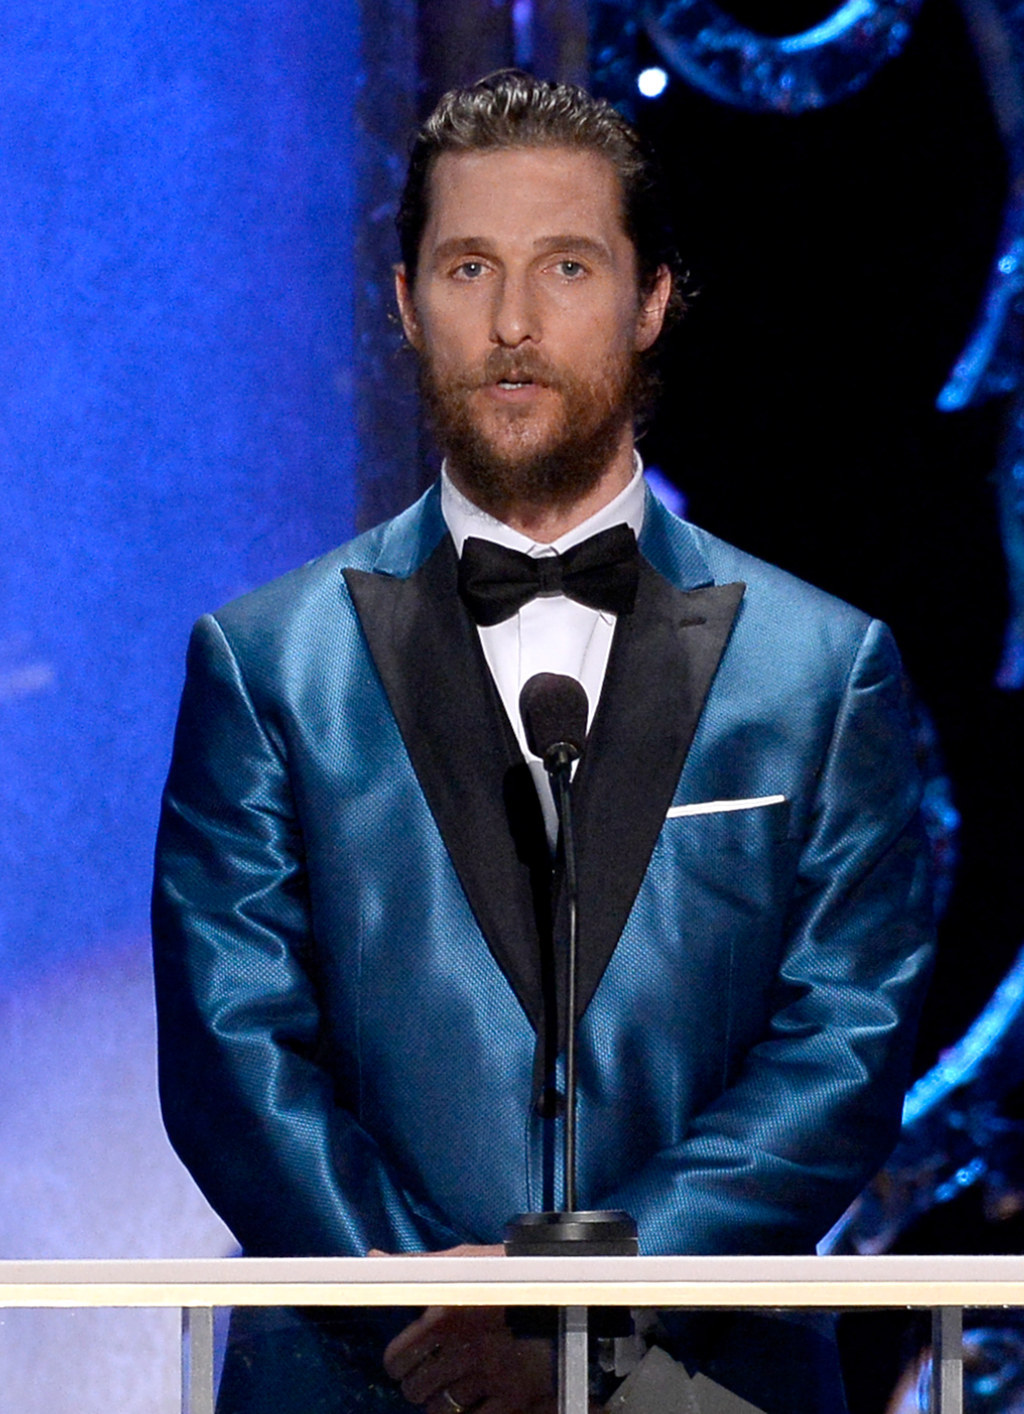 Oscar Fashion: Finding the Right Beard Style for the Red Carpet